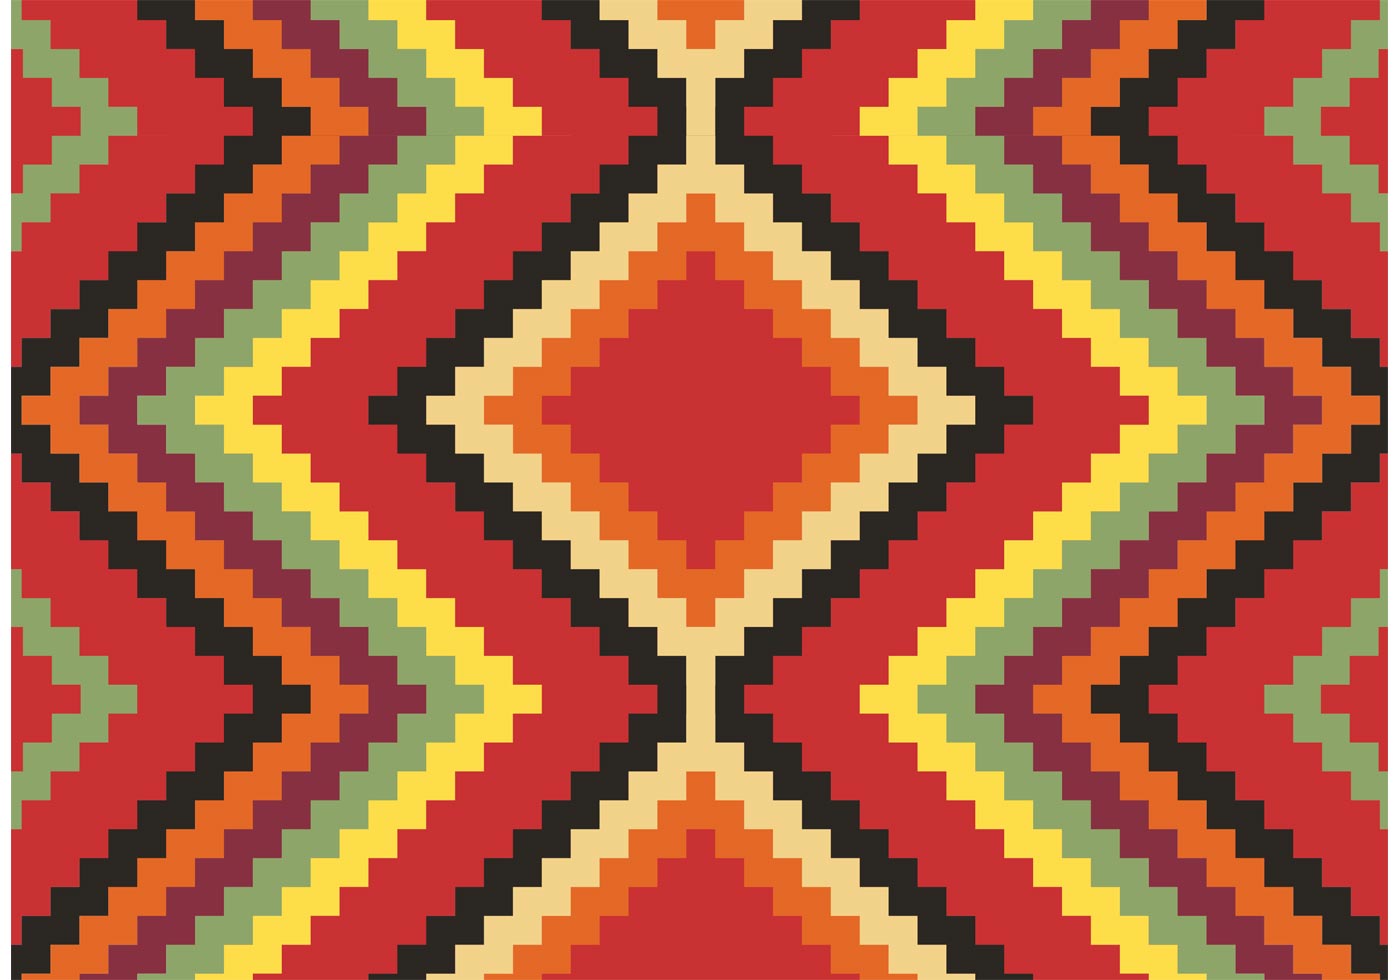 Native American Pattern Free Vector - Download Free Vector Art, Stock